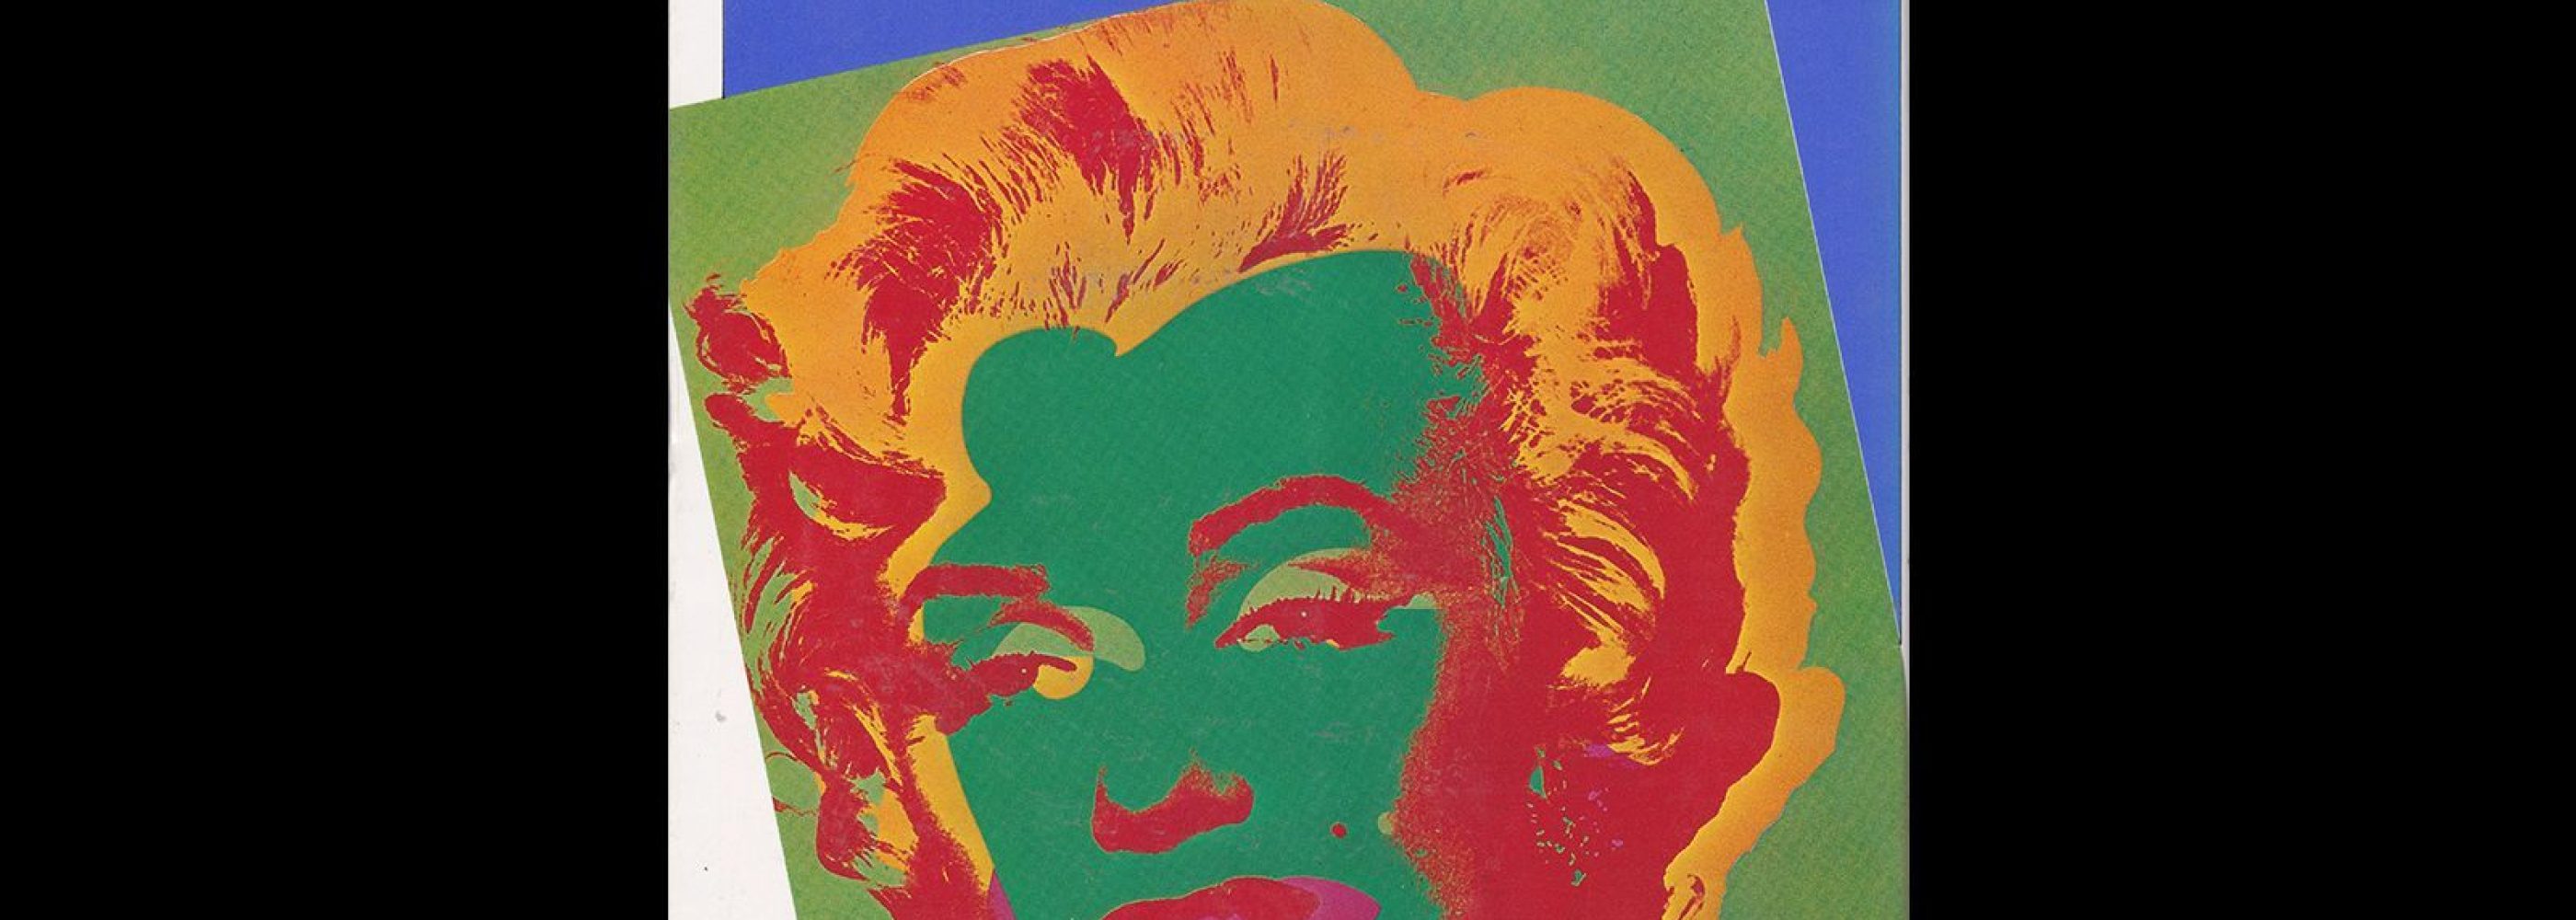 Andy Warhol, Pop Art Giant, Parco Picture Bucks, 1991